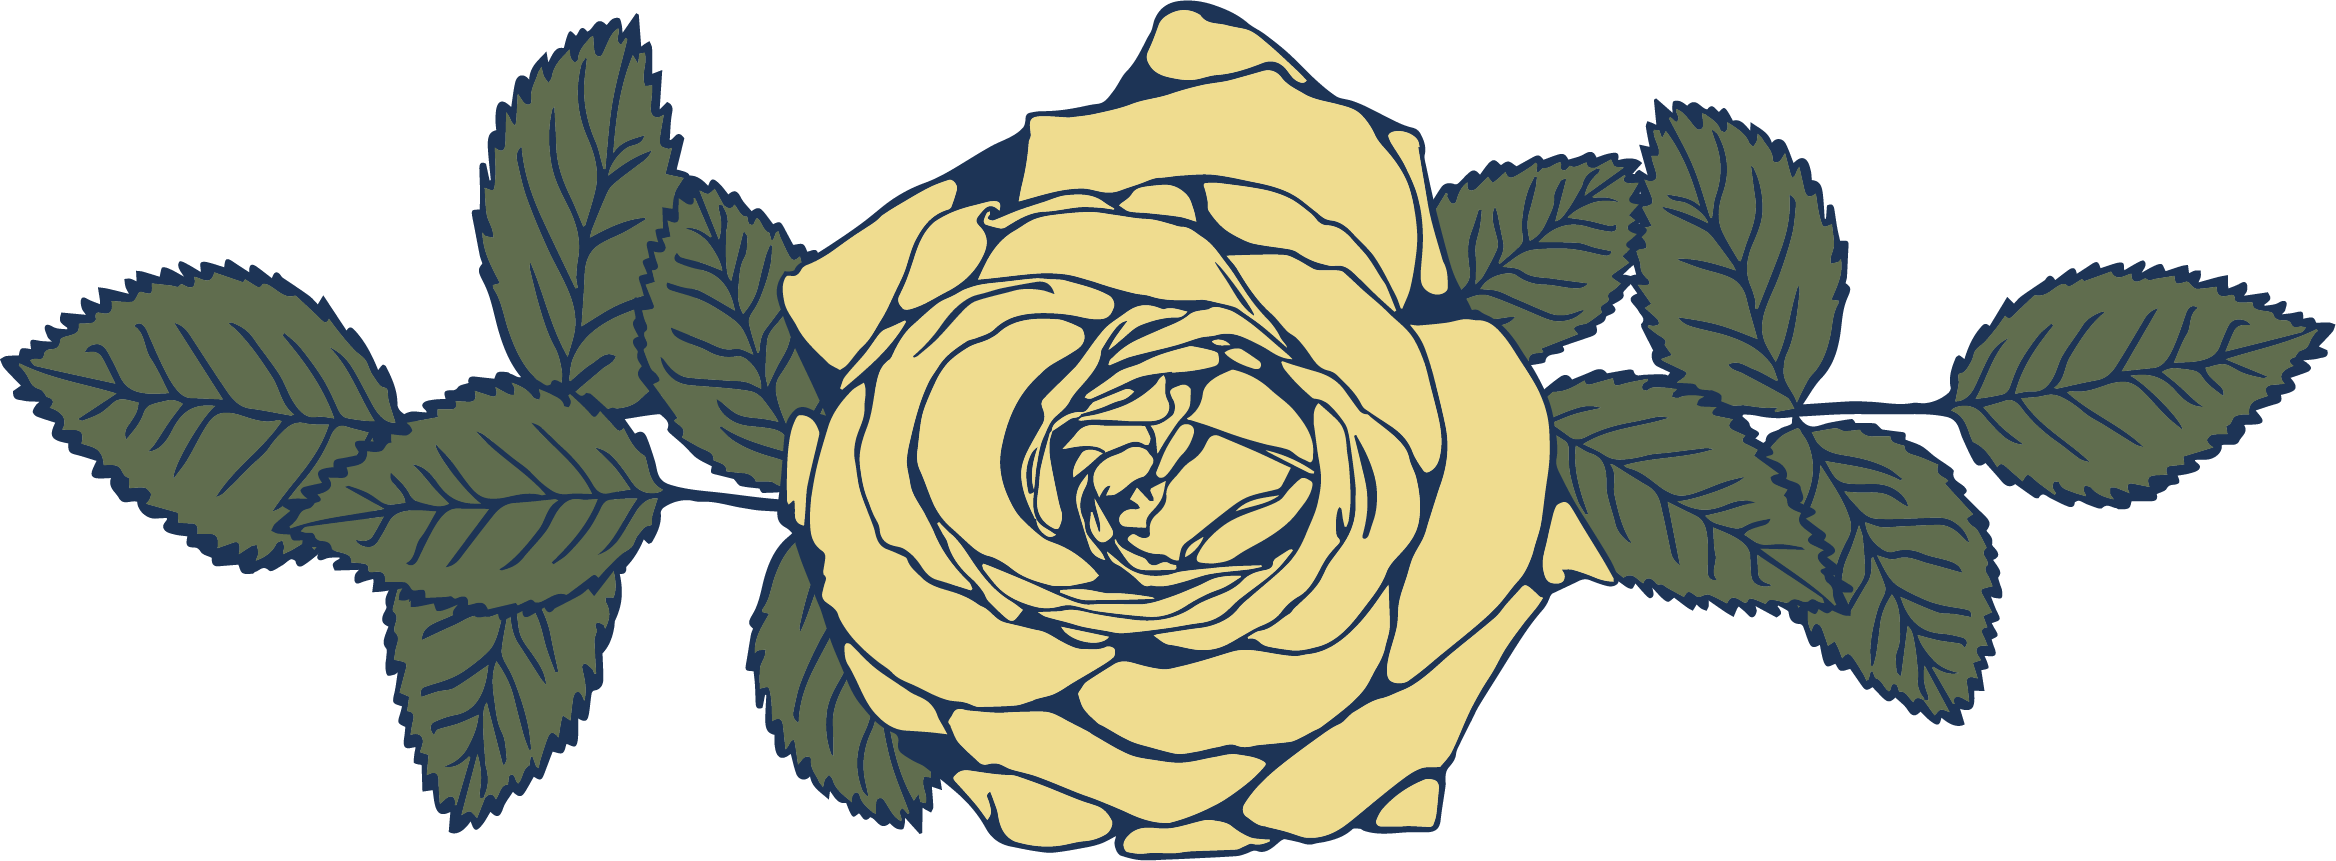 Vector drawing of a faded yellow rose and faded green leaves.